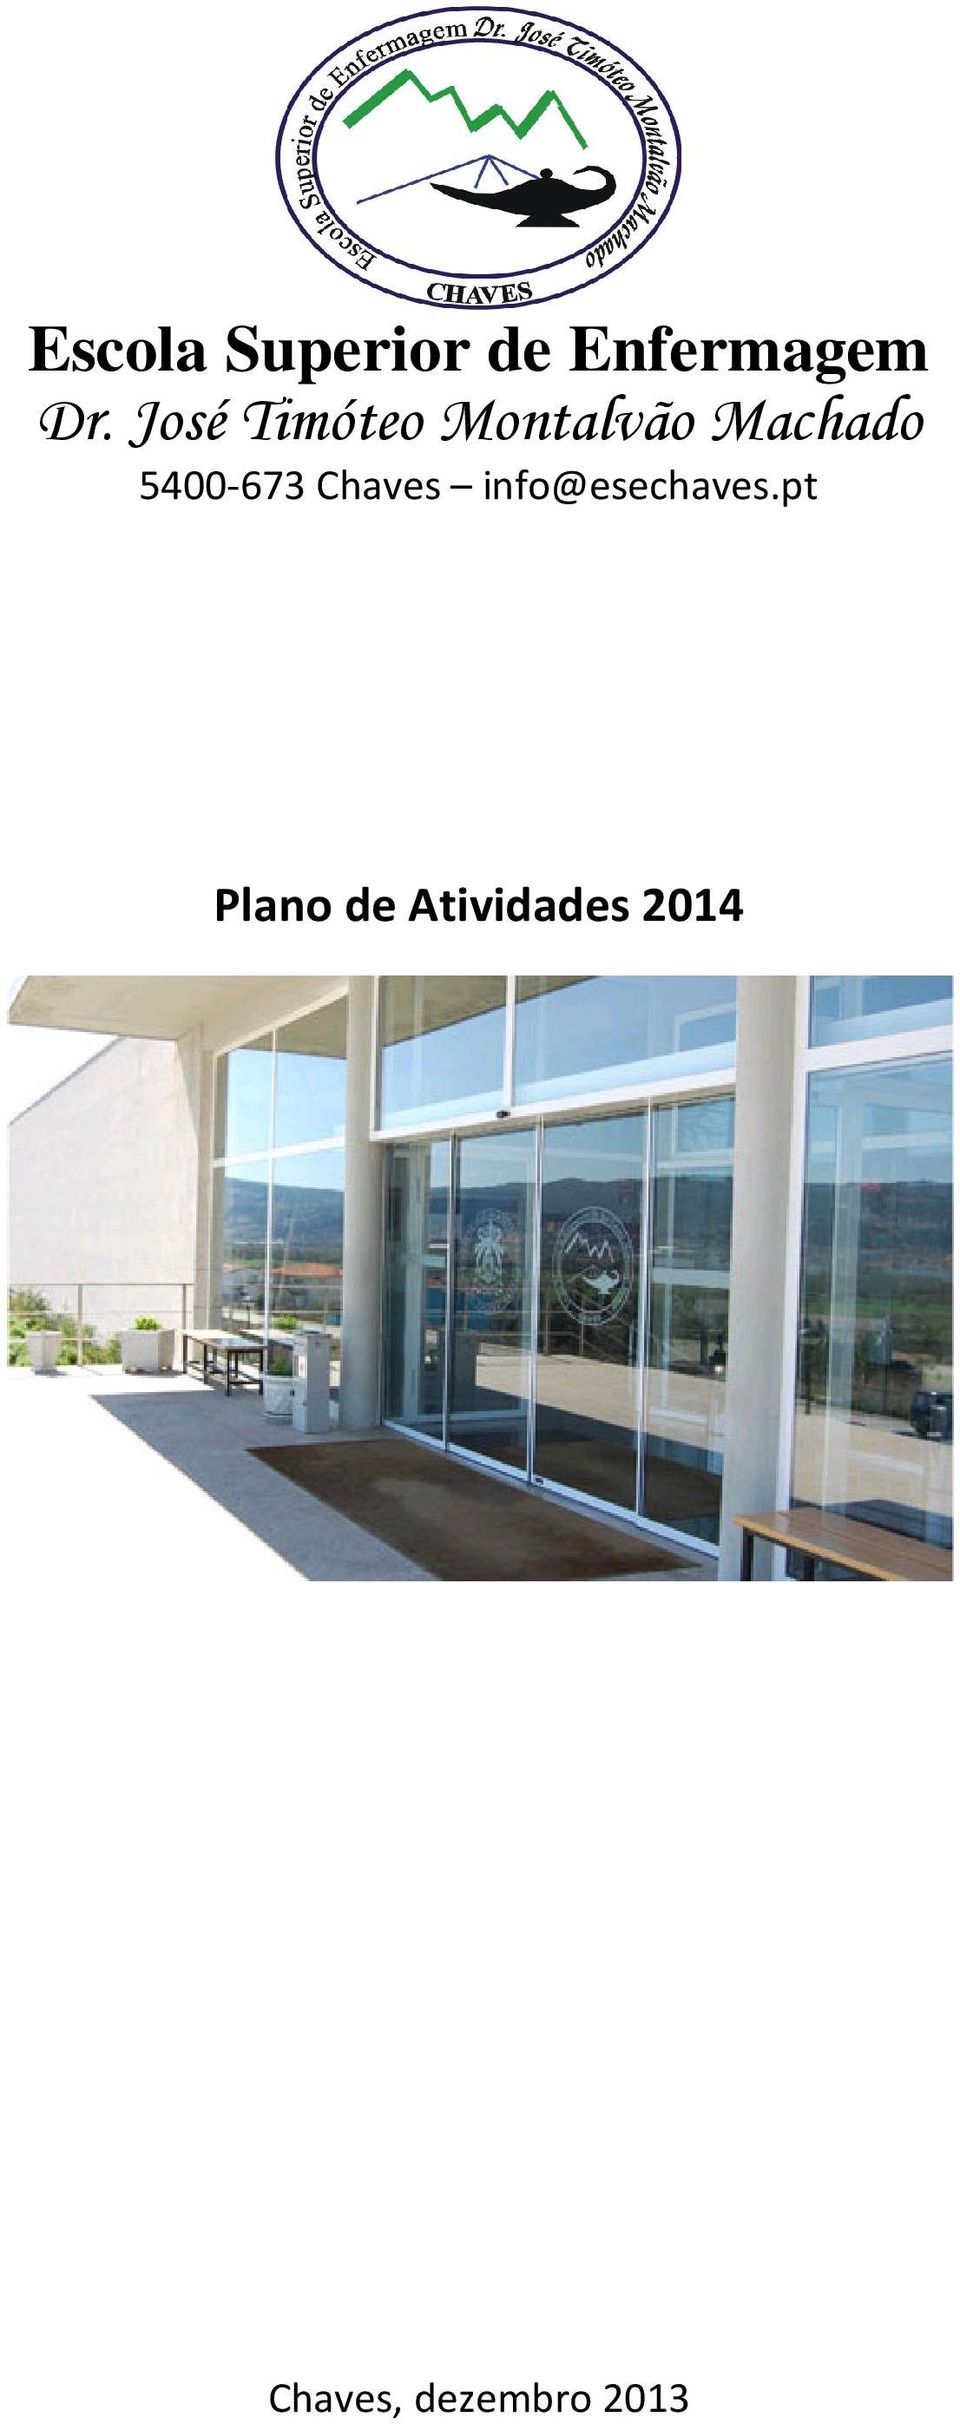 5400-673 Chaves info@esechaves.